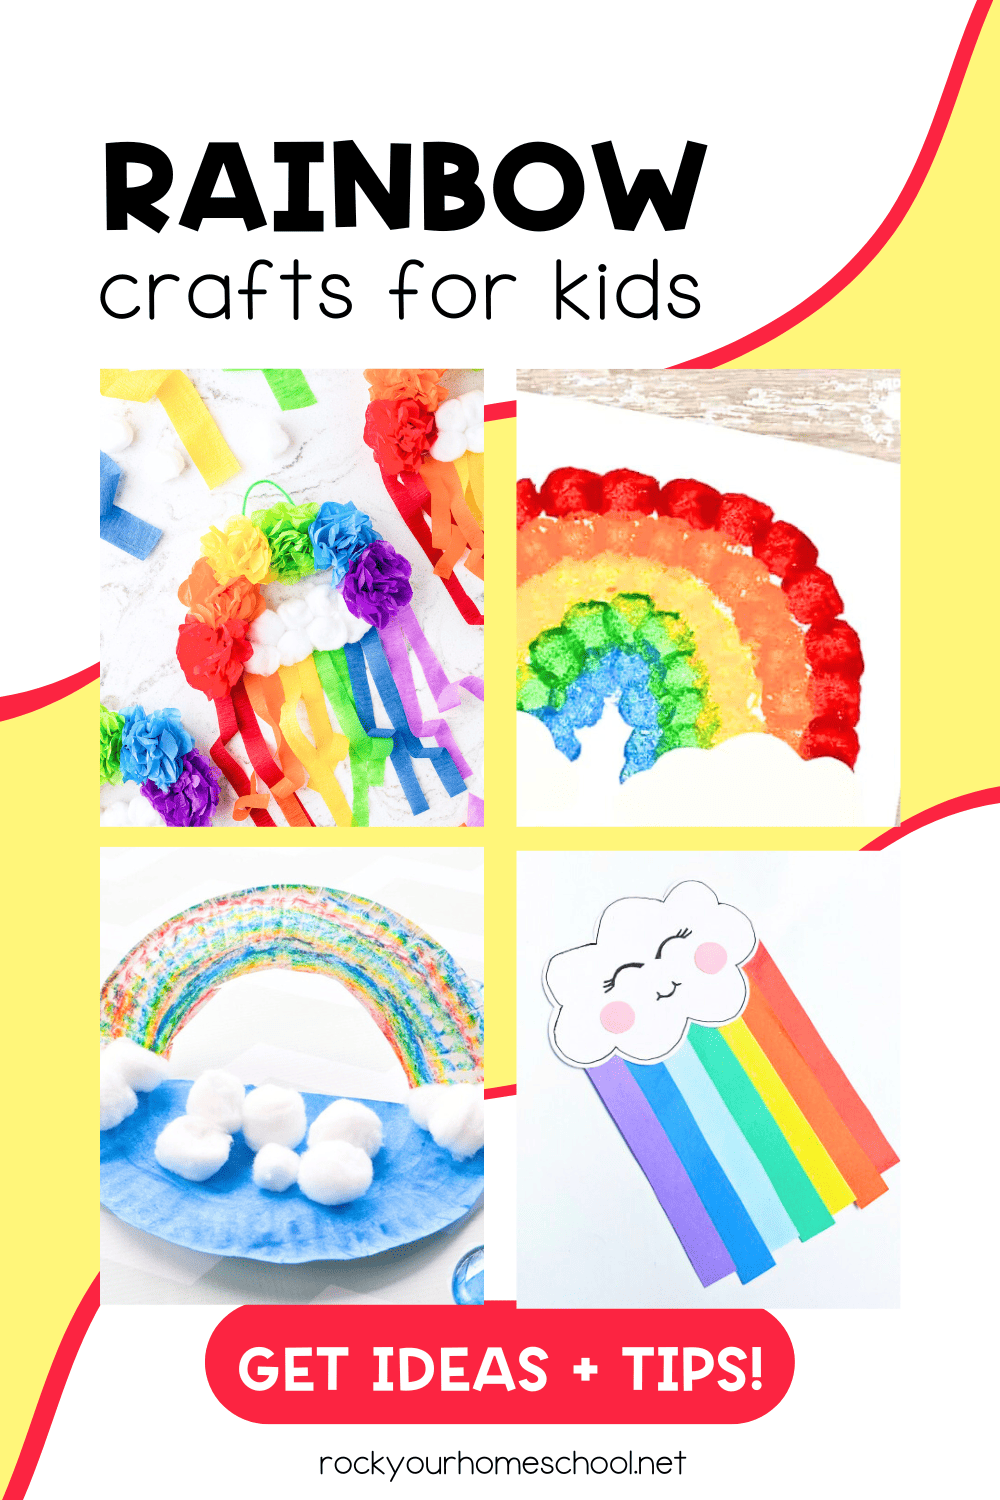 Easy Rainbow Crafts for Kids: Creative Ways to Enjoy Colorful Activities